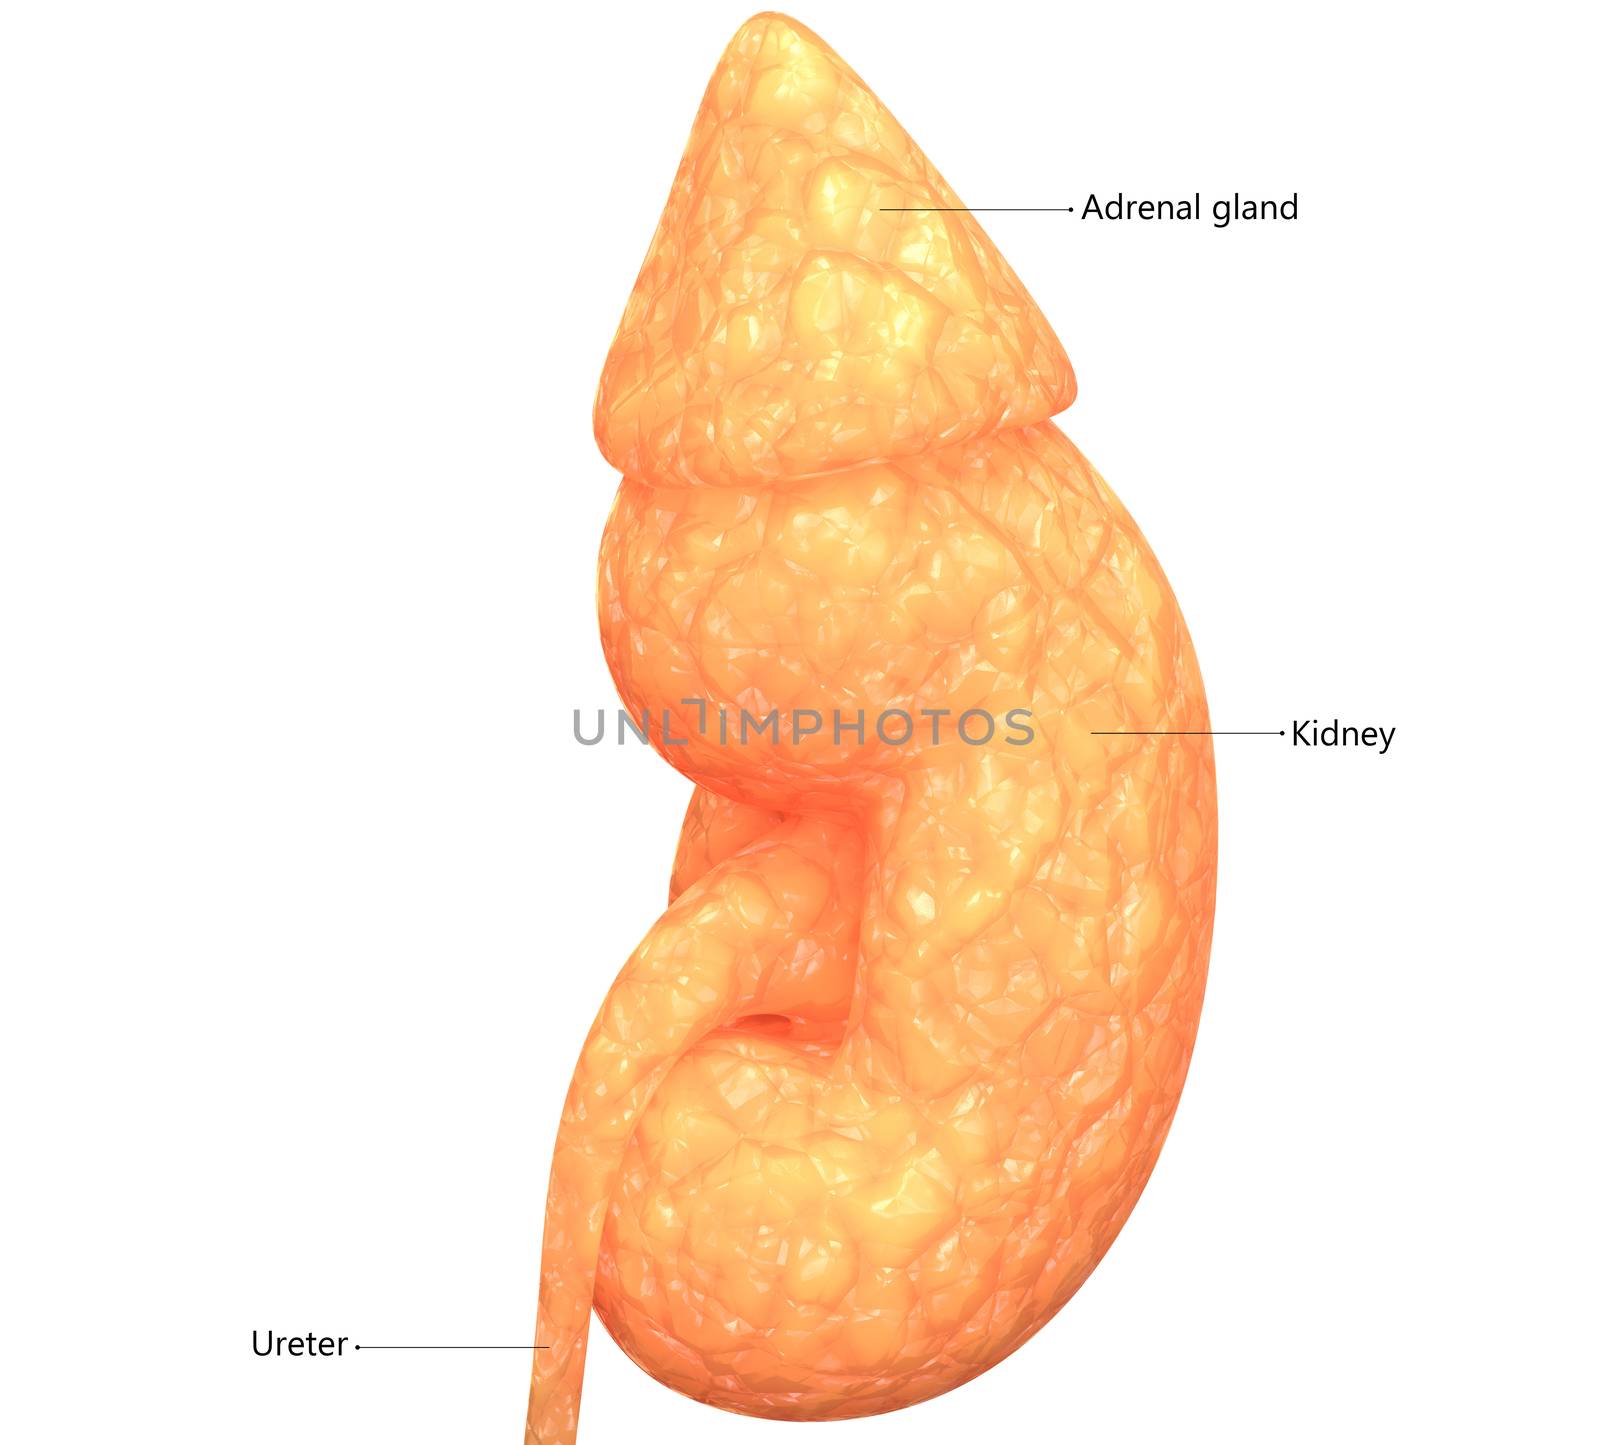 Human Urinary System Kidney Described with Labels Anatomy by magicmine